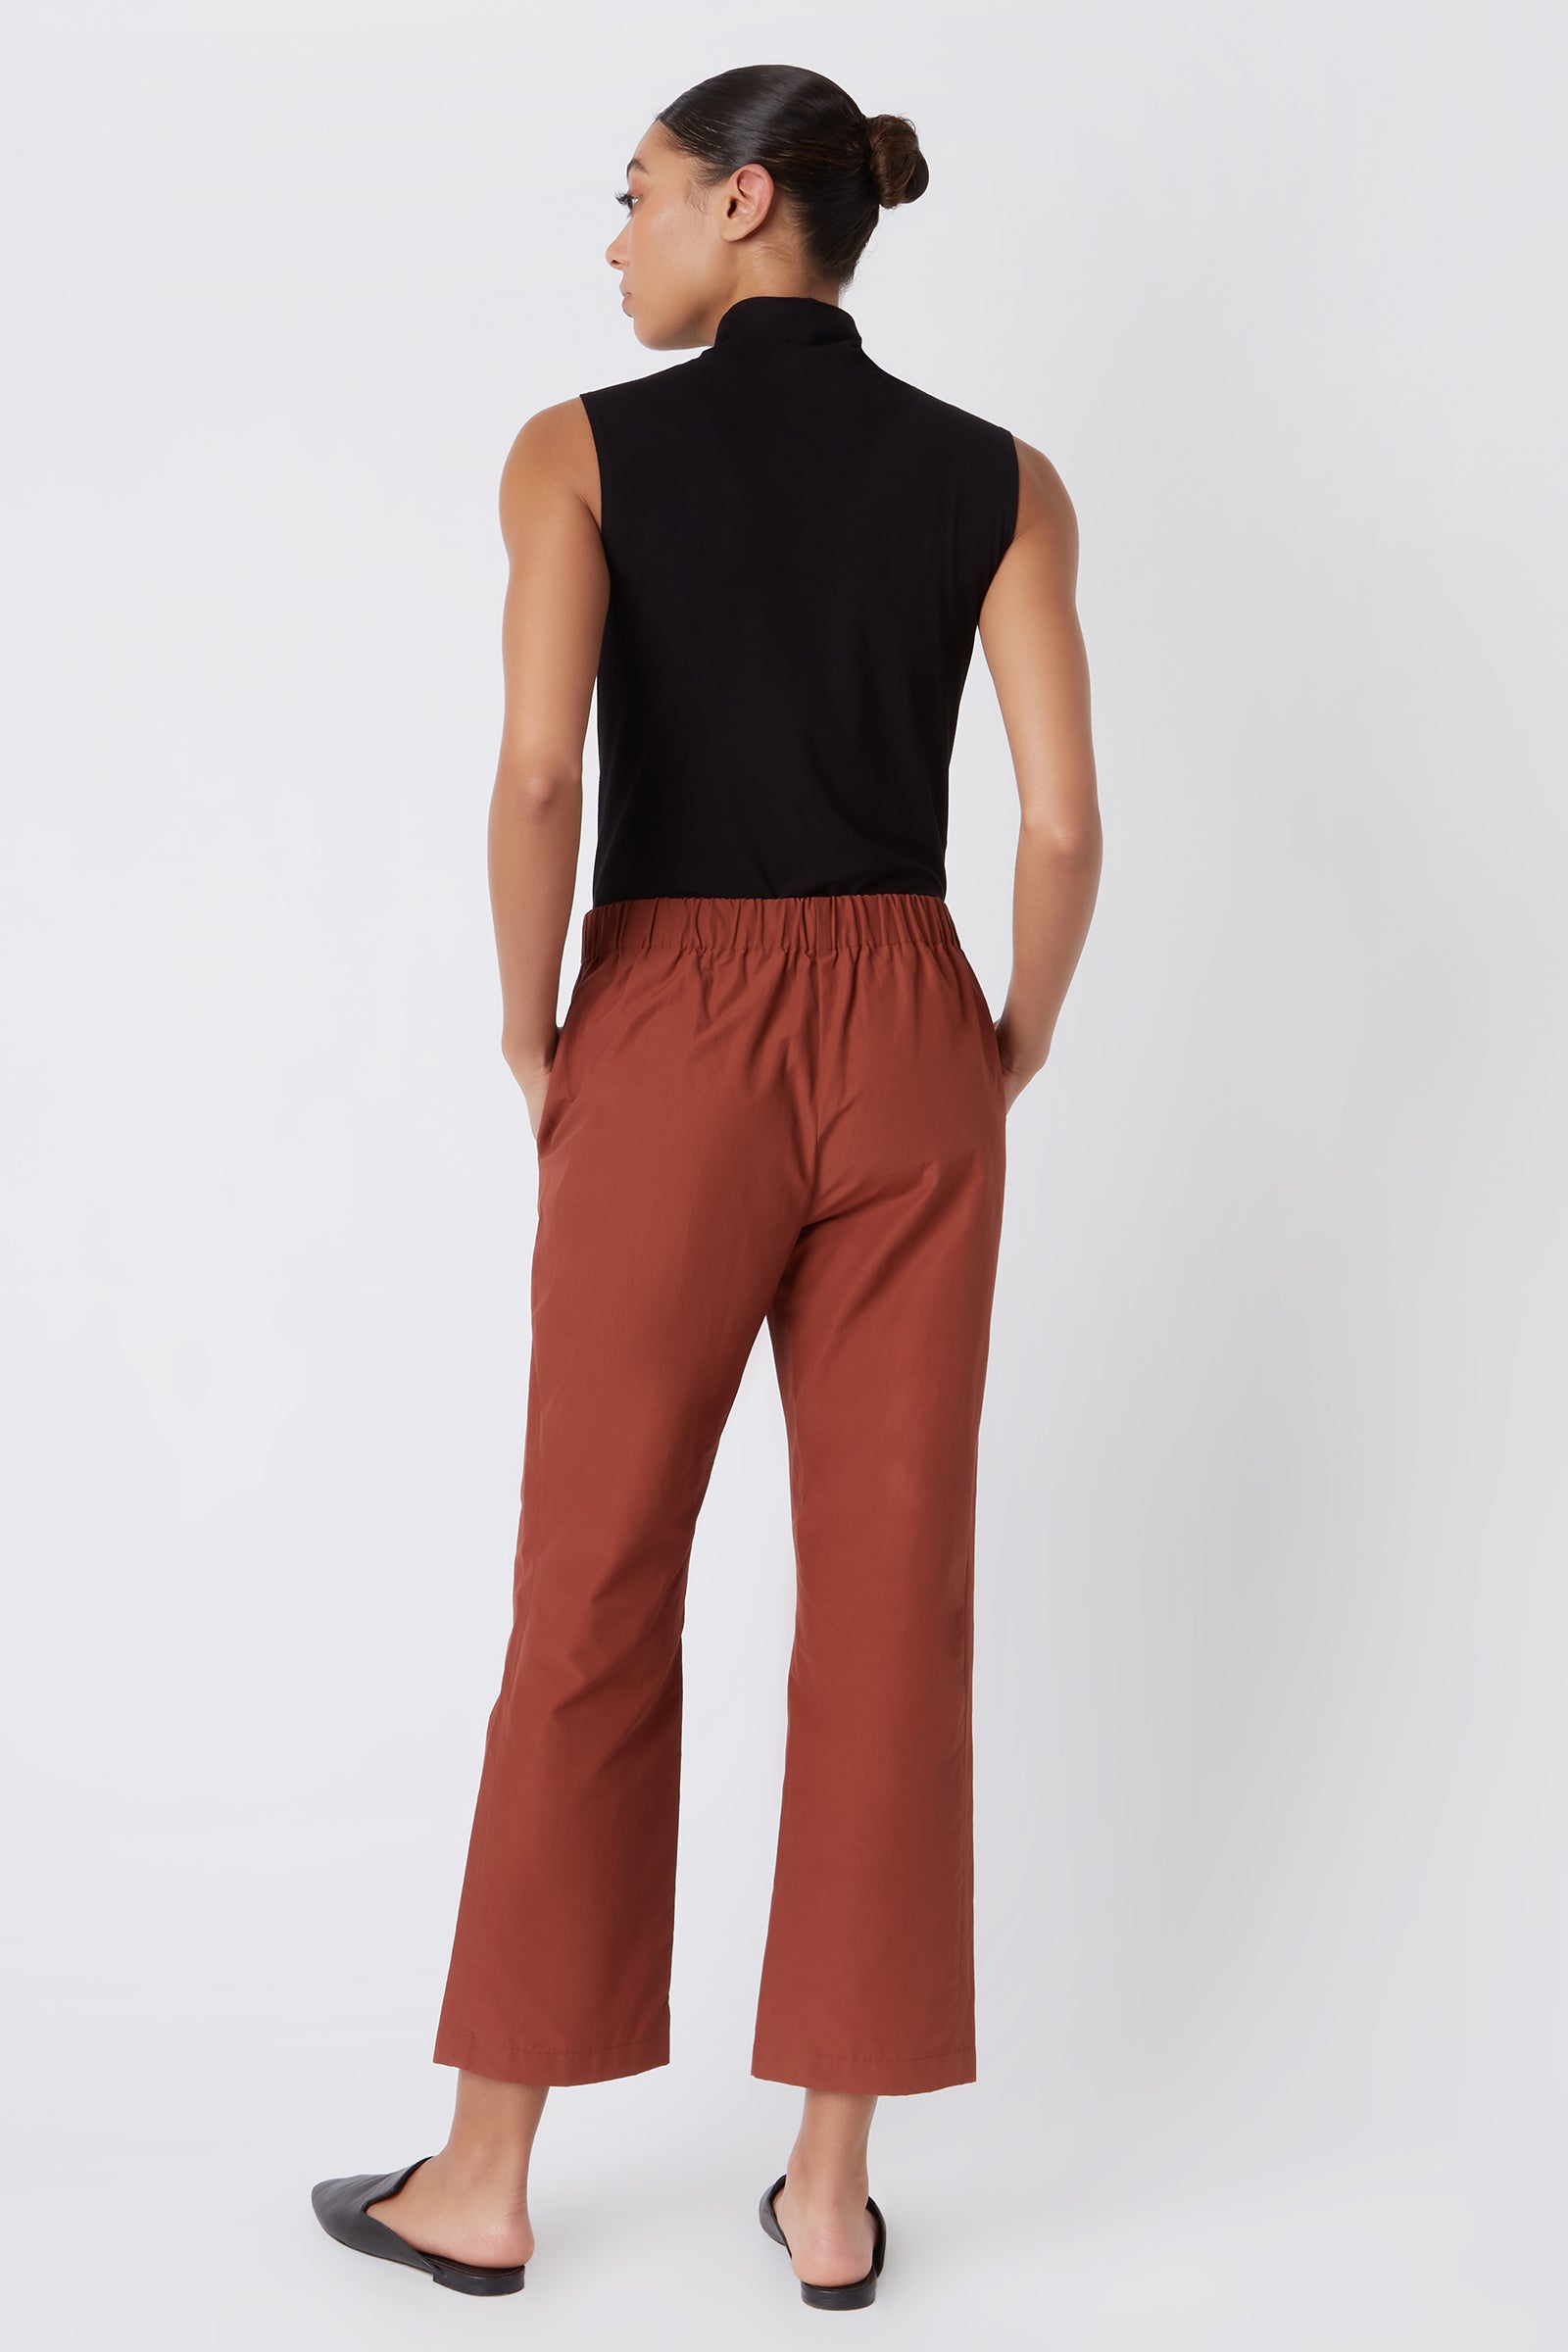 Kal Rieman Brit Crop Pant in Rust Italian Broadcloth on Model with Hands in Pocket Full Front View